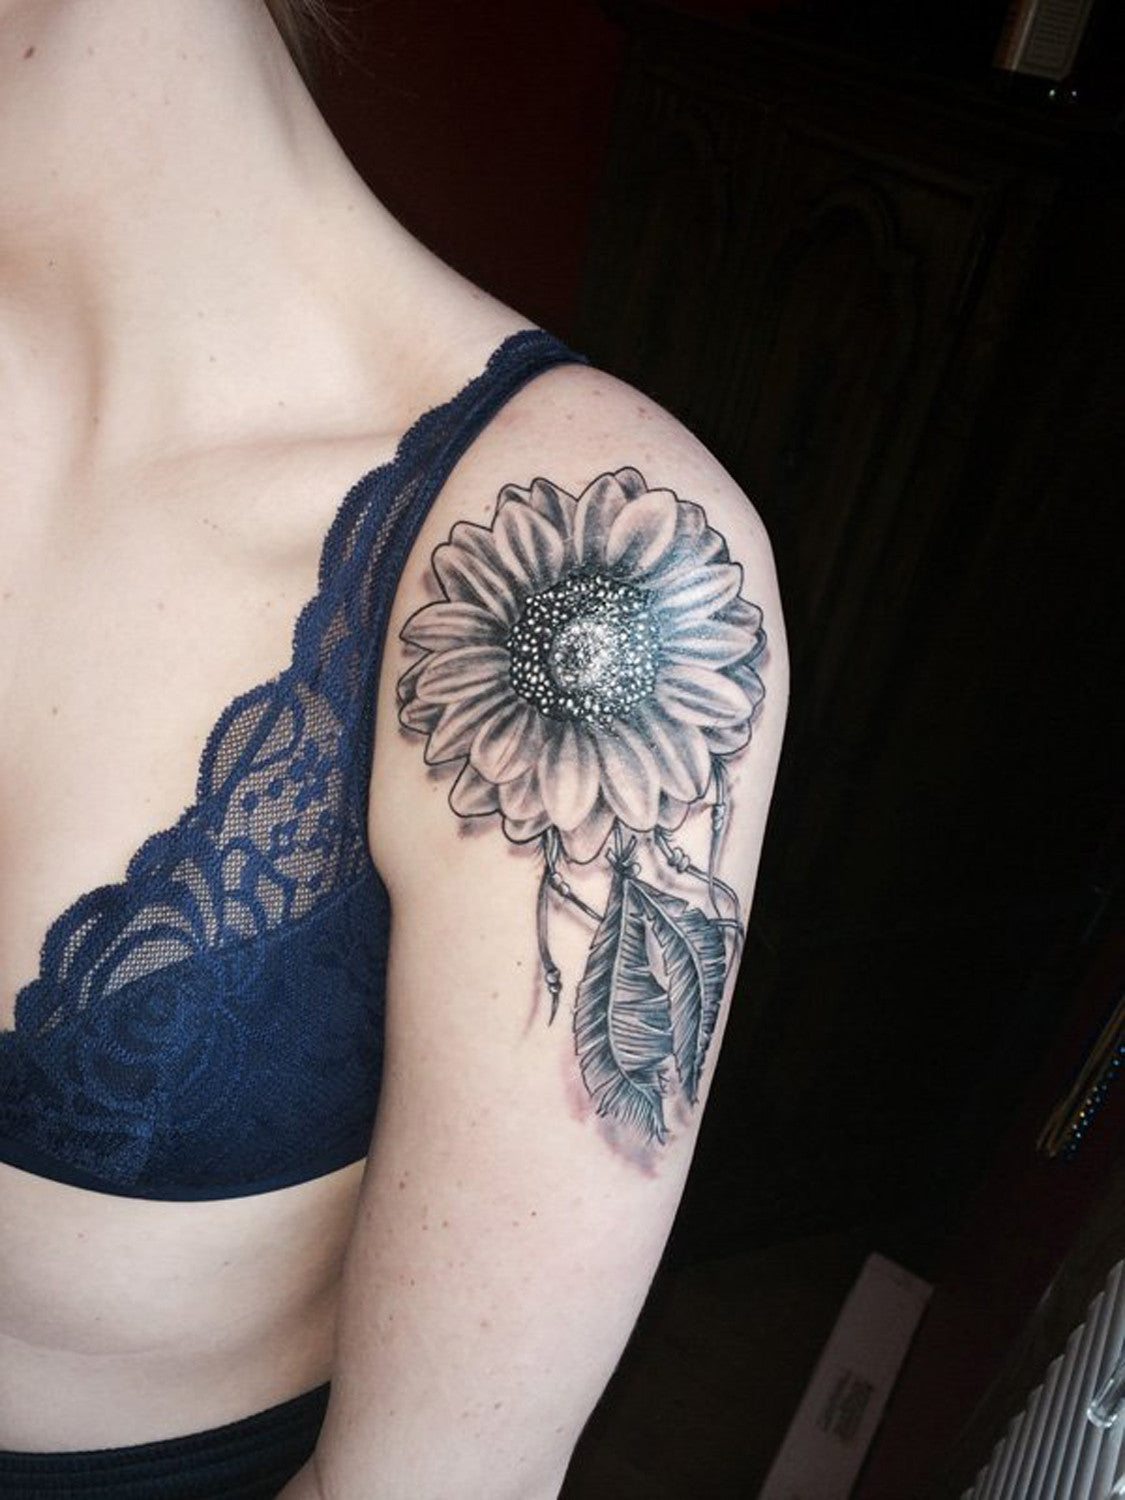 Traditional Simple Full Sunflower Shoulder Tattoo Ideas for Women at MyBodiArt.com 